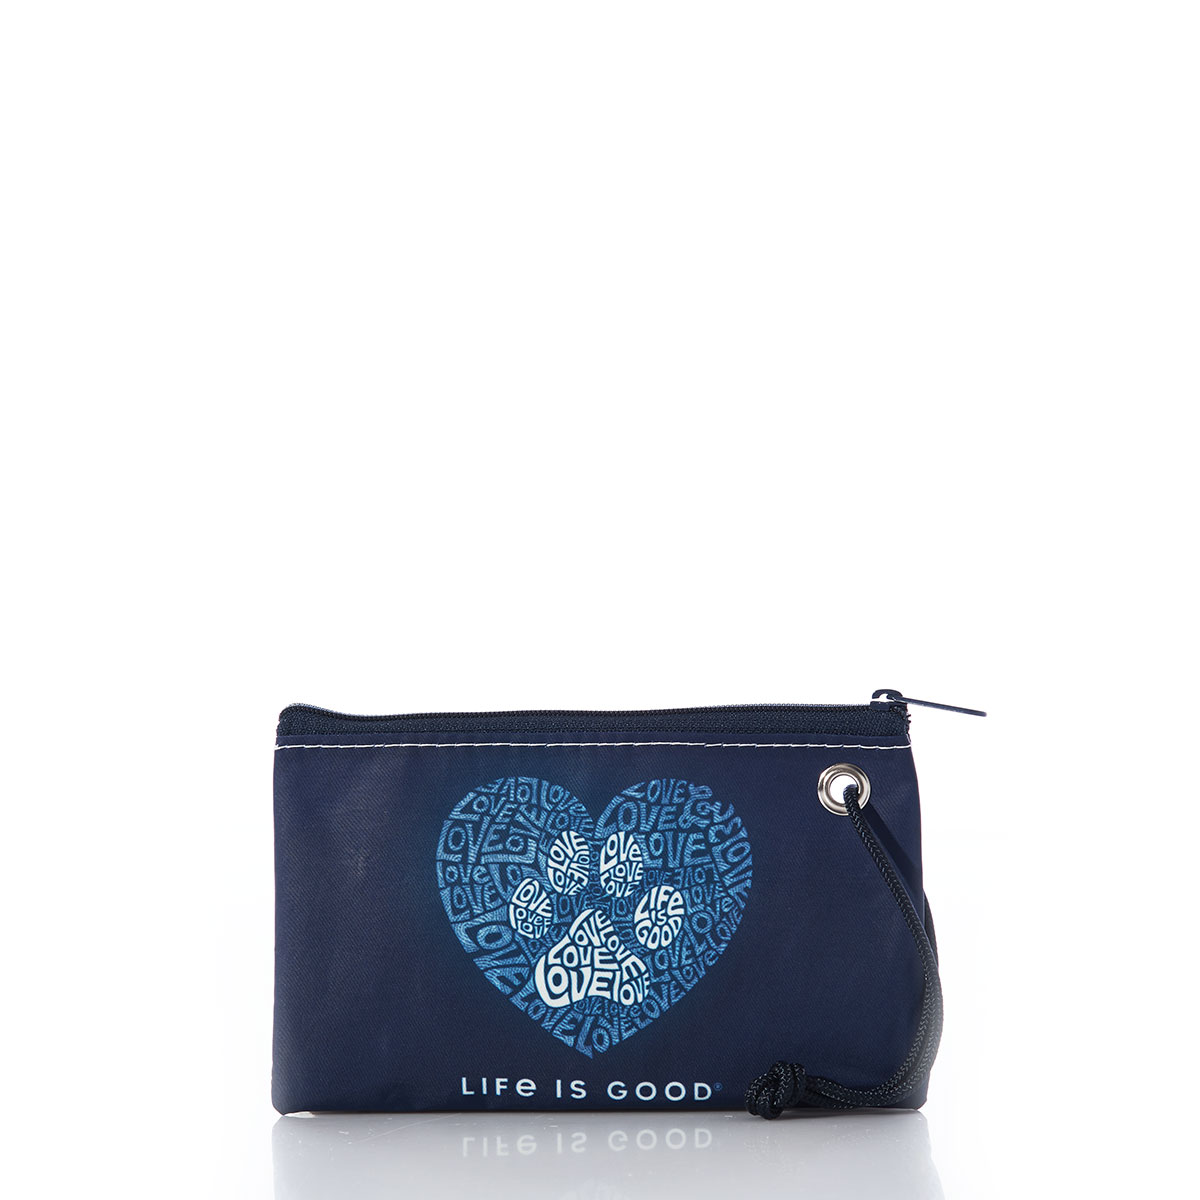 white paw print made of words inside light blue heart print made of words on navy recycled sail cloth wristlet with navy zipper and wristlet strap